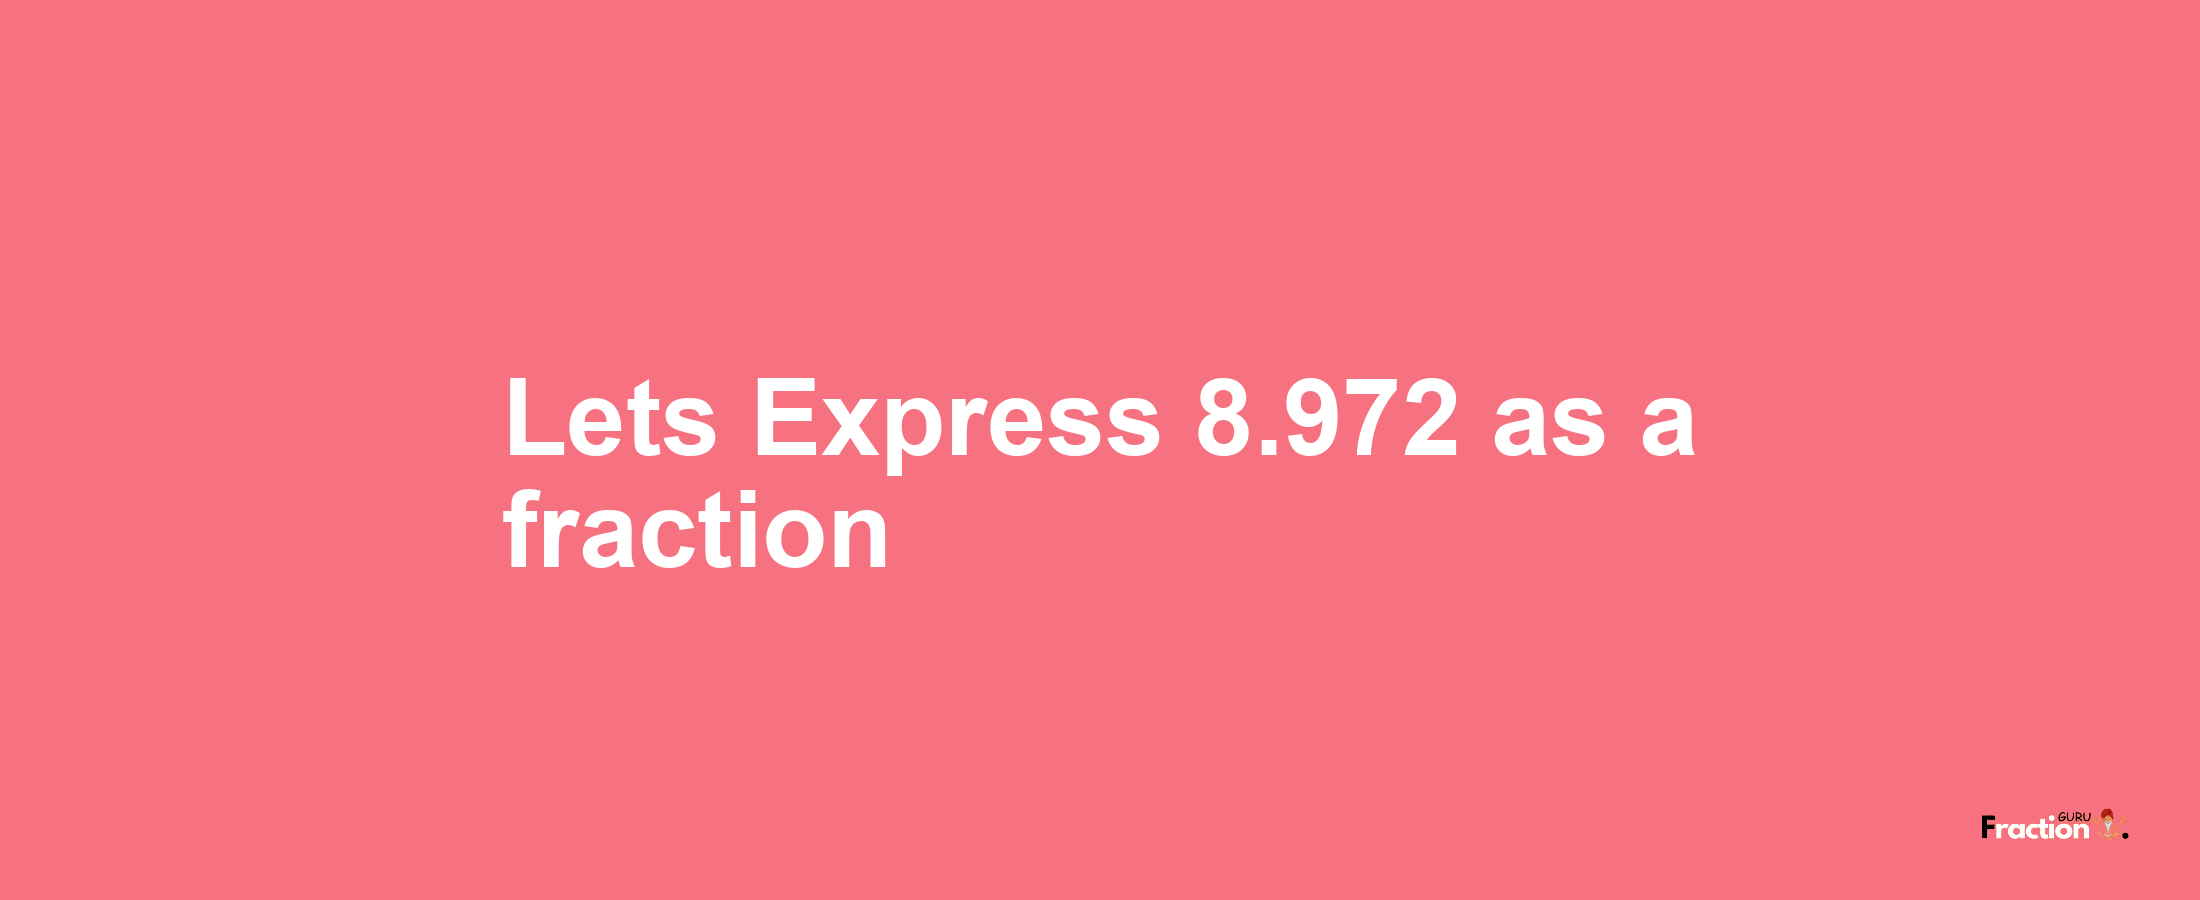 Lets Express 8.972 as afraction